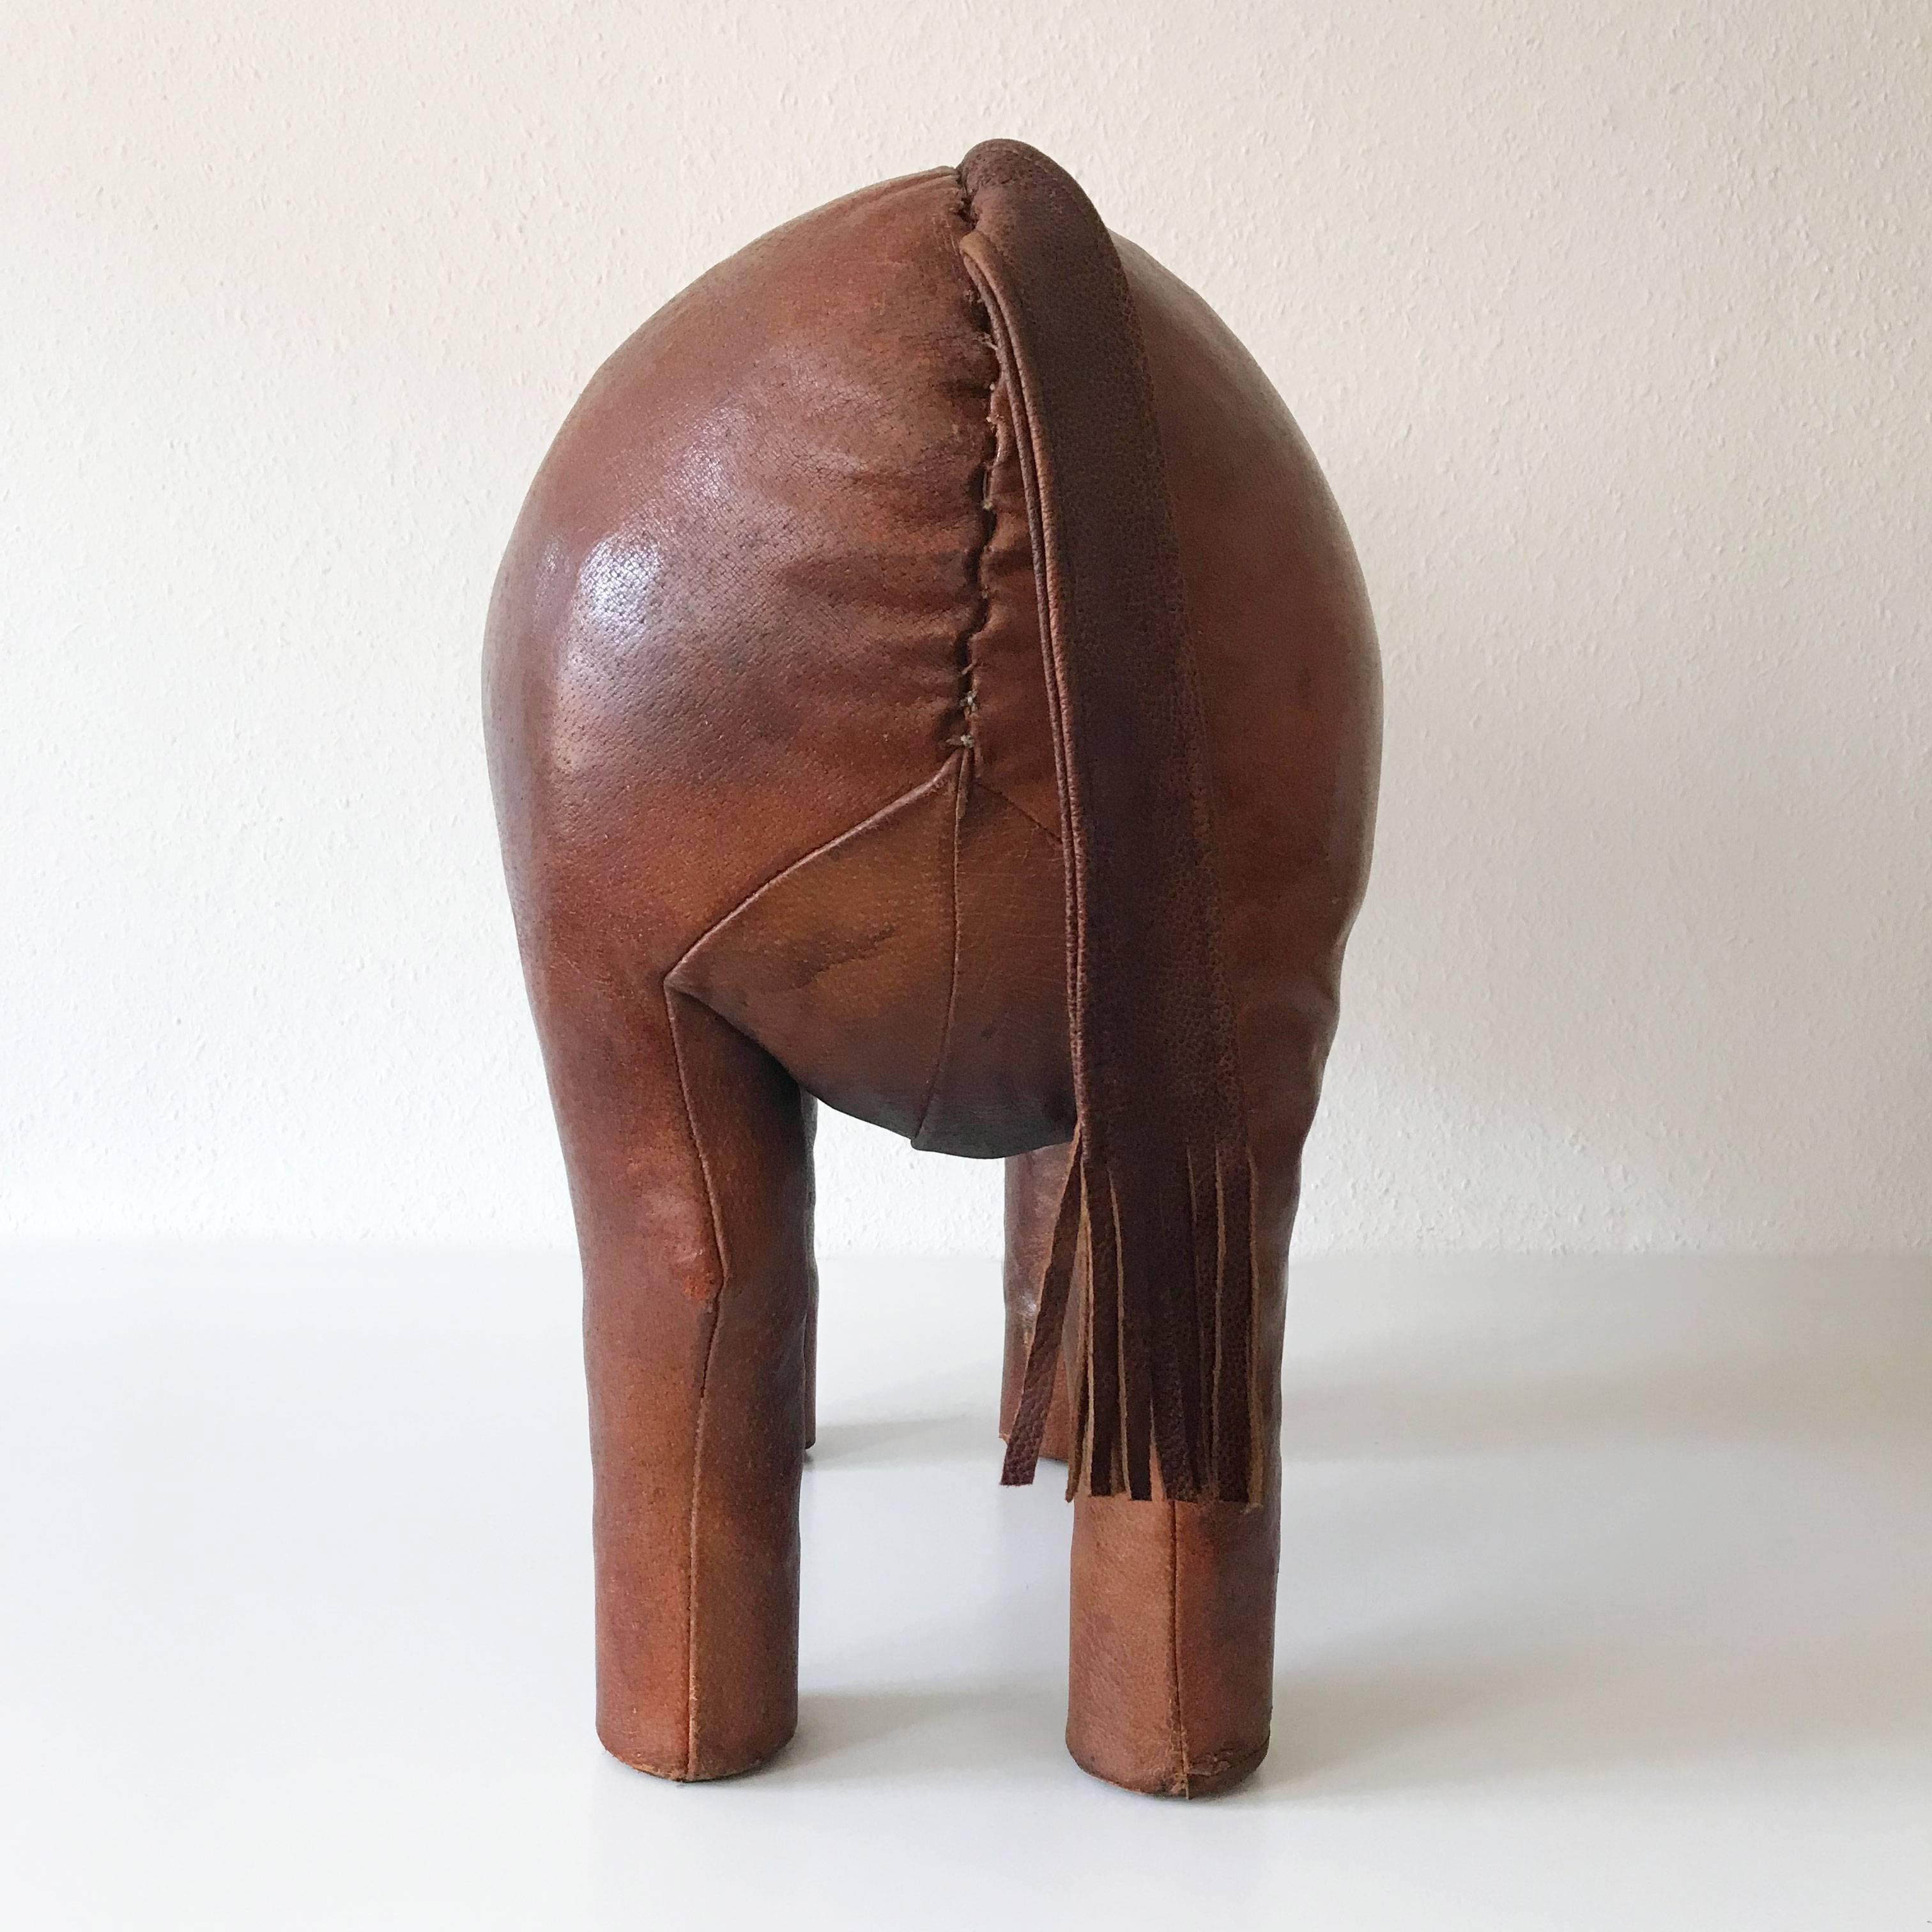 Original Leather Bull Footstool or Ottoman by Dimitri Omersa, 1960s, England 2